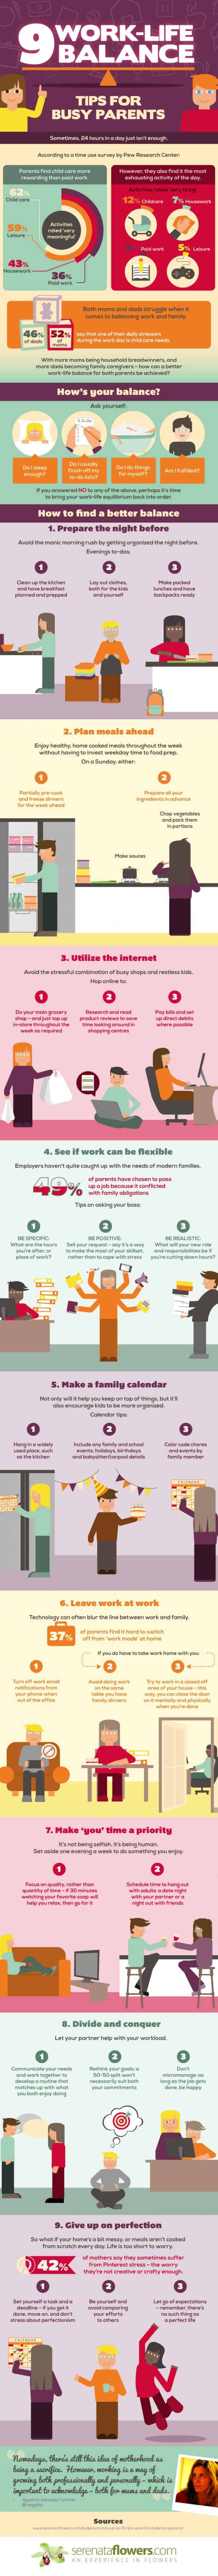 Infographic with tips for working parents about balancing work with family